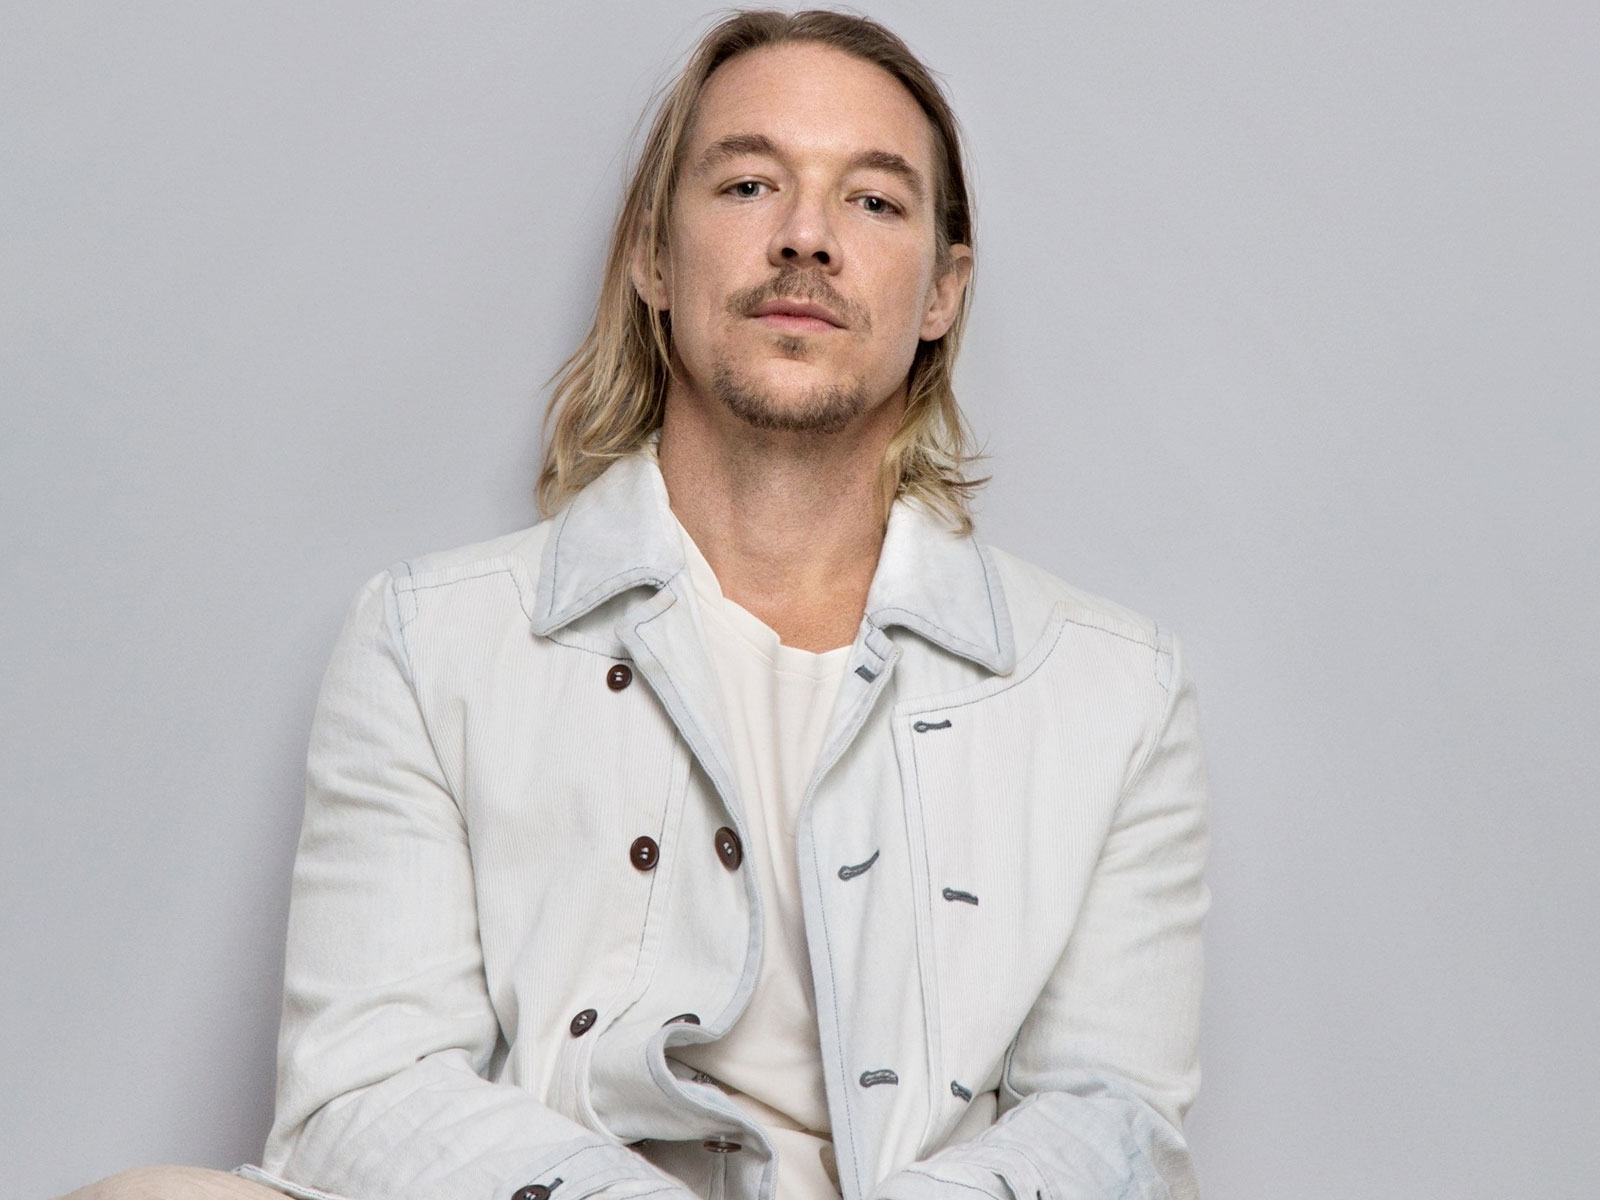 diplo-one-by-one-oz-edm-feature